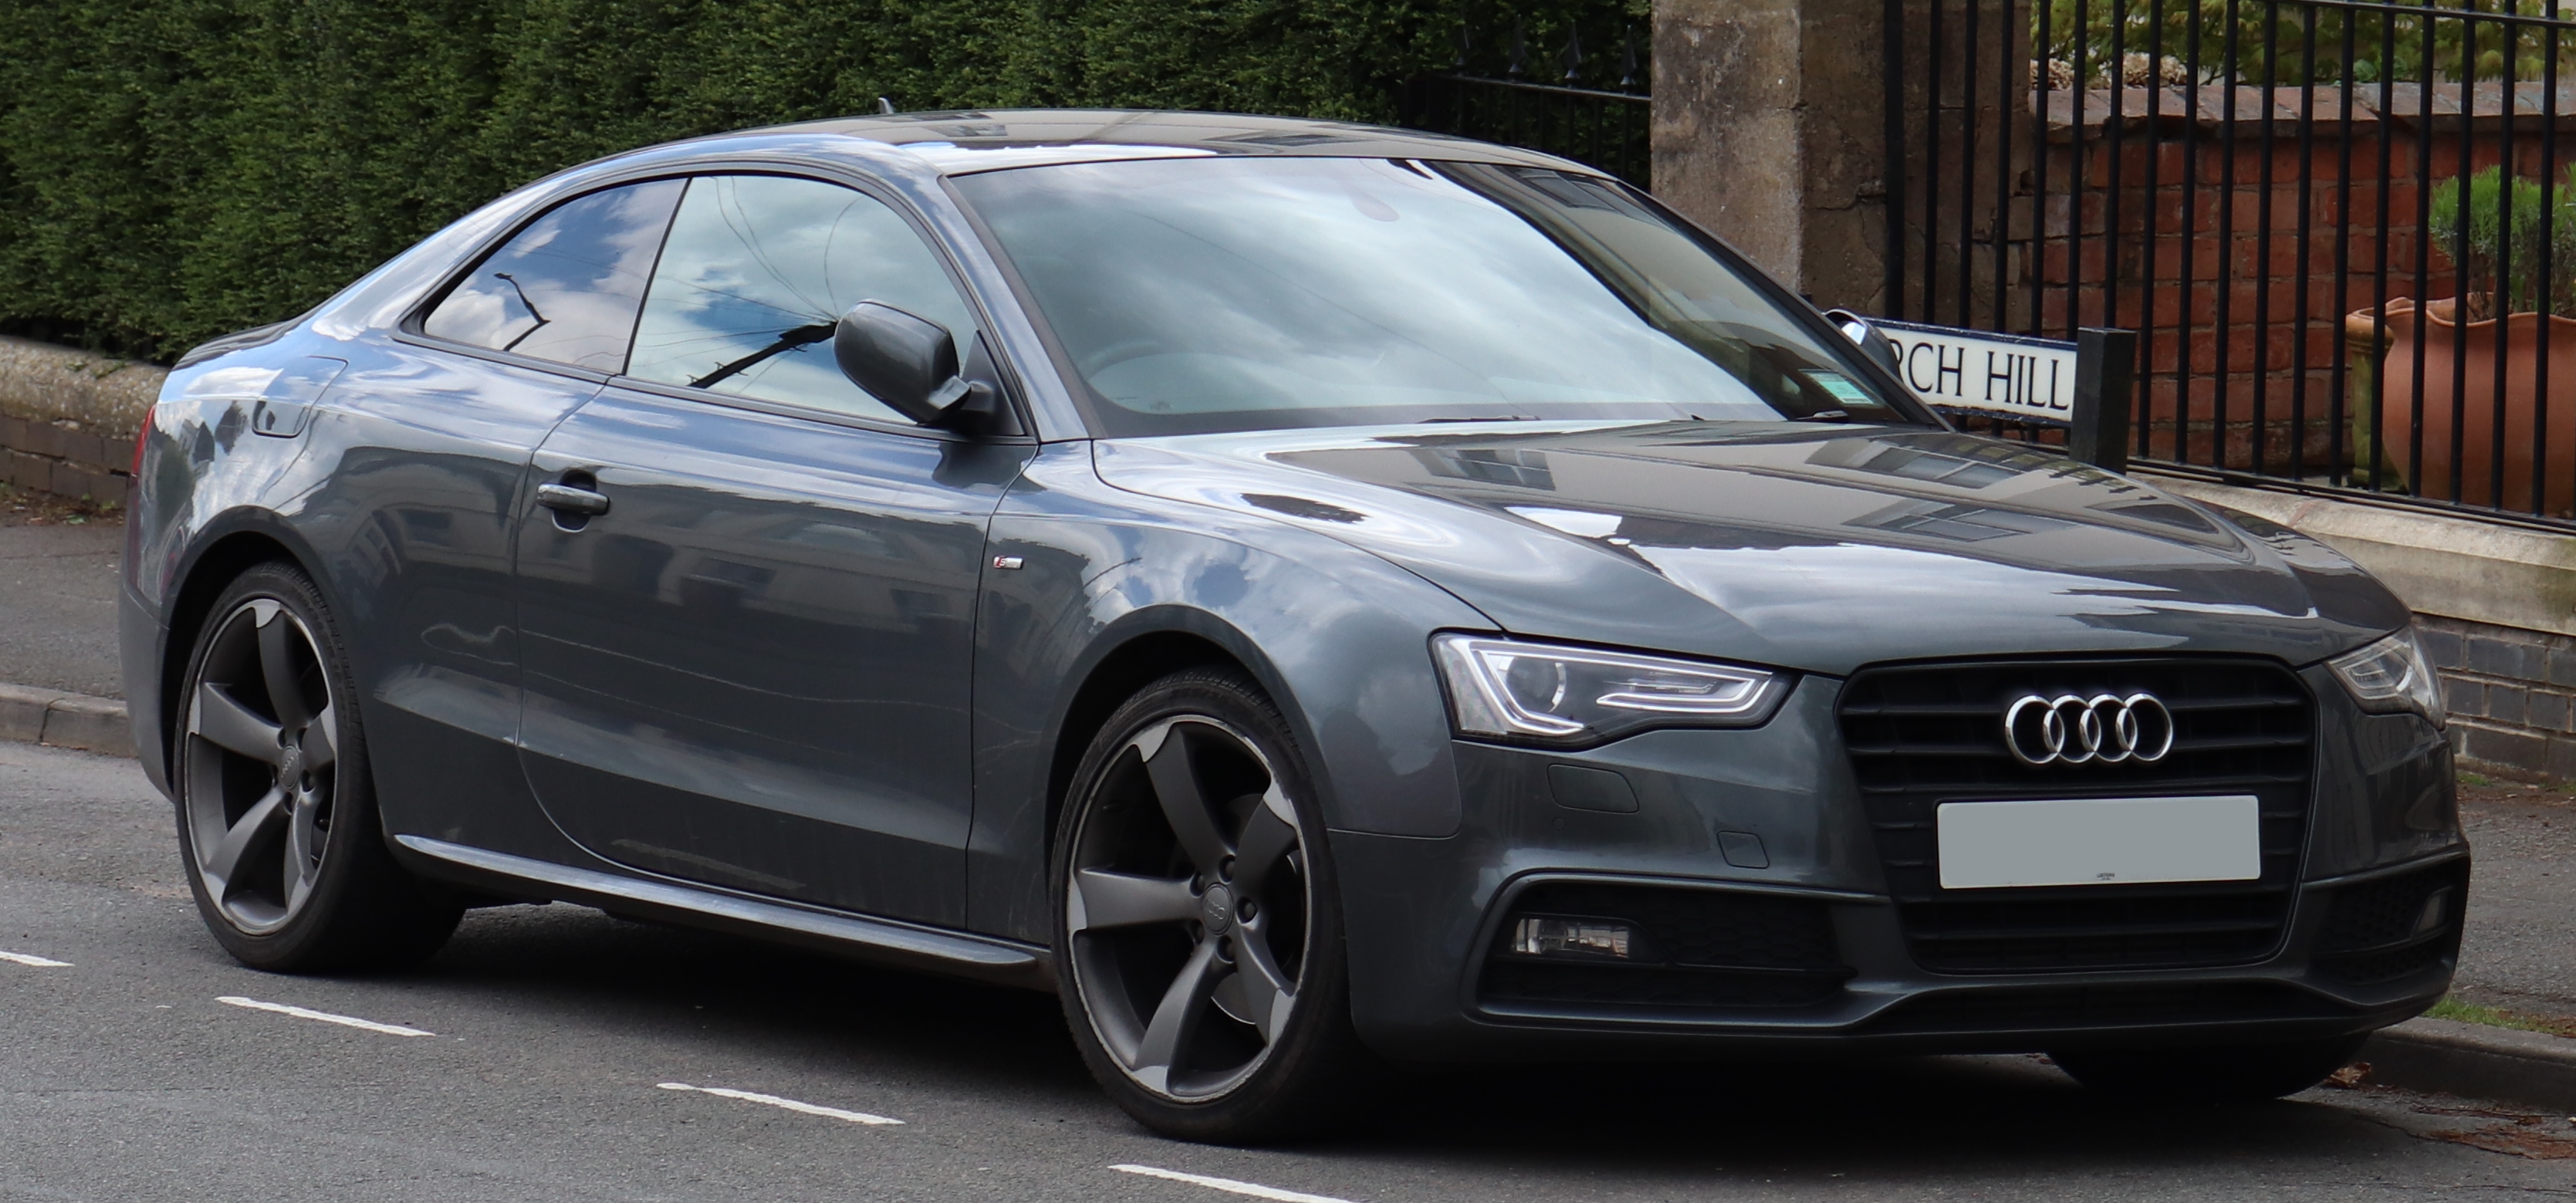 File:2012 Audi A5 S Line Black Edition 2.0 Front.jpg - Wikimedia Commons